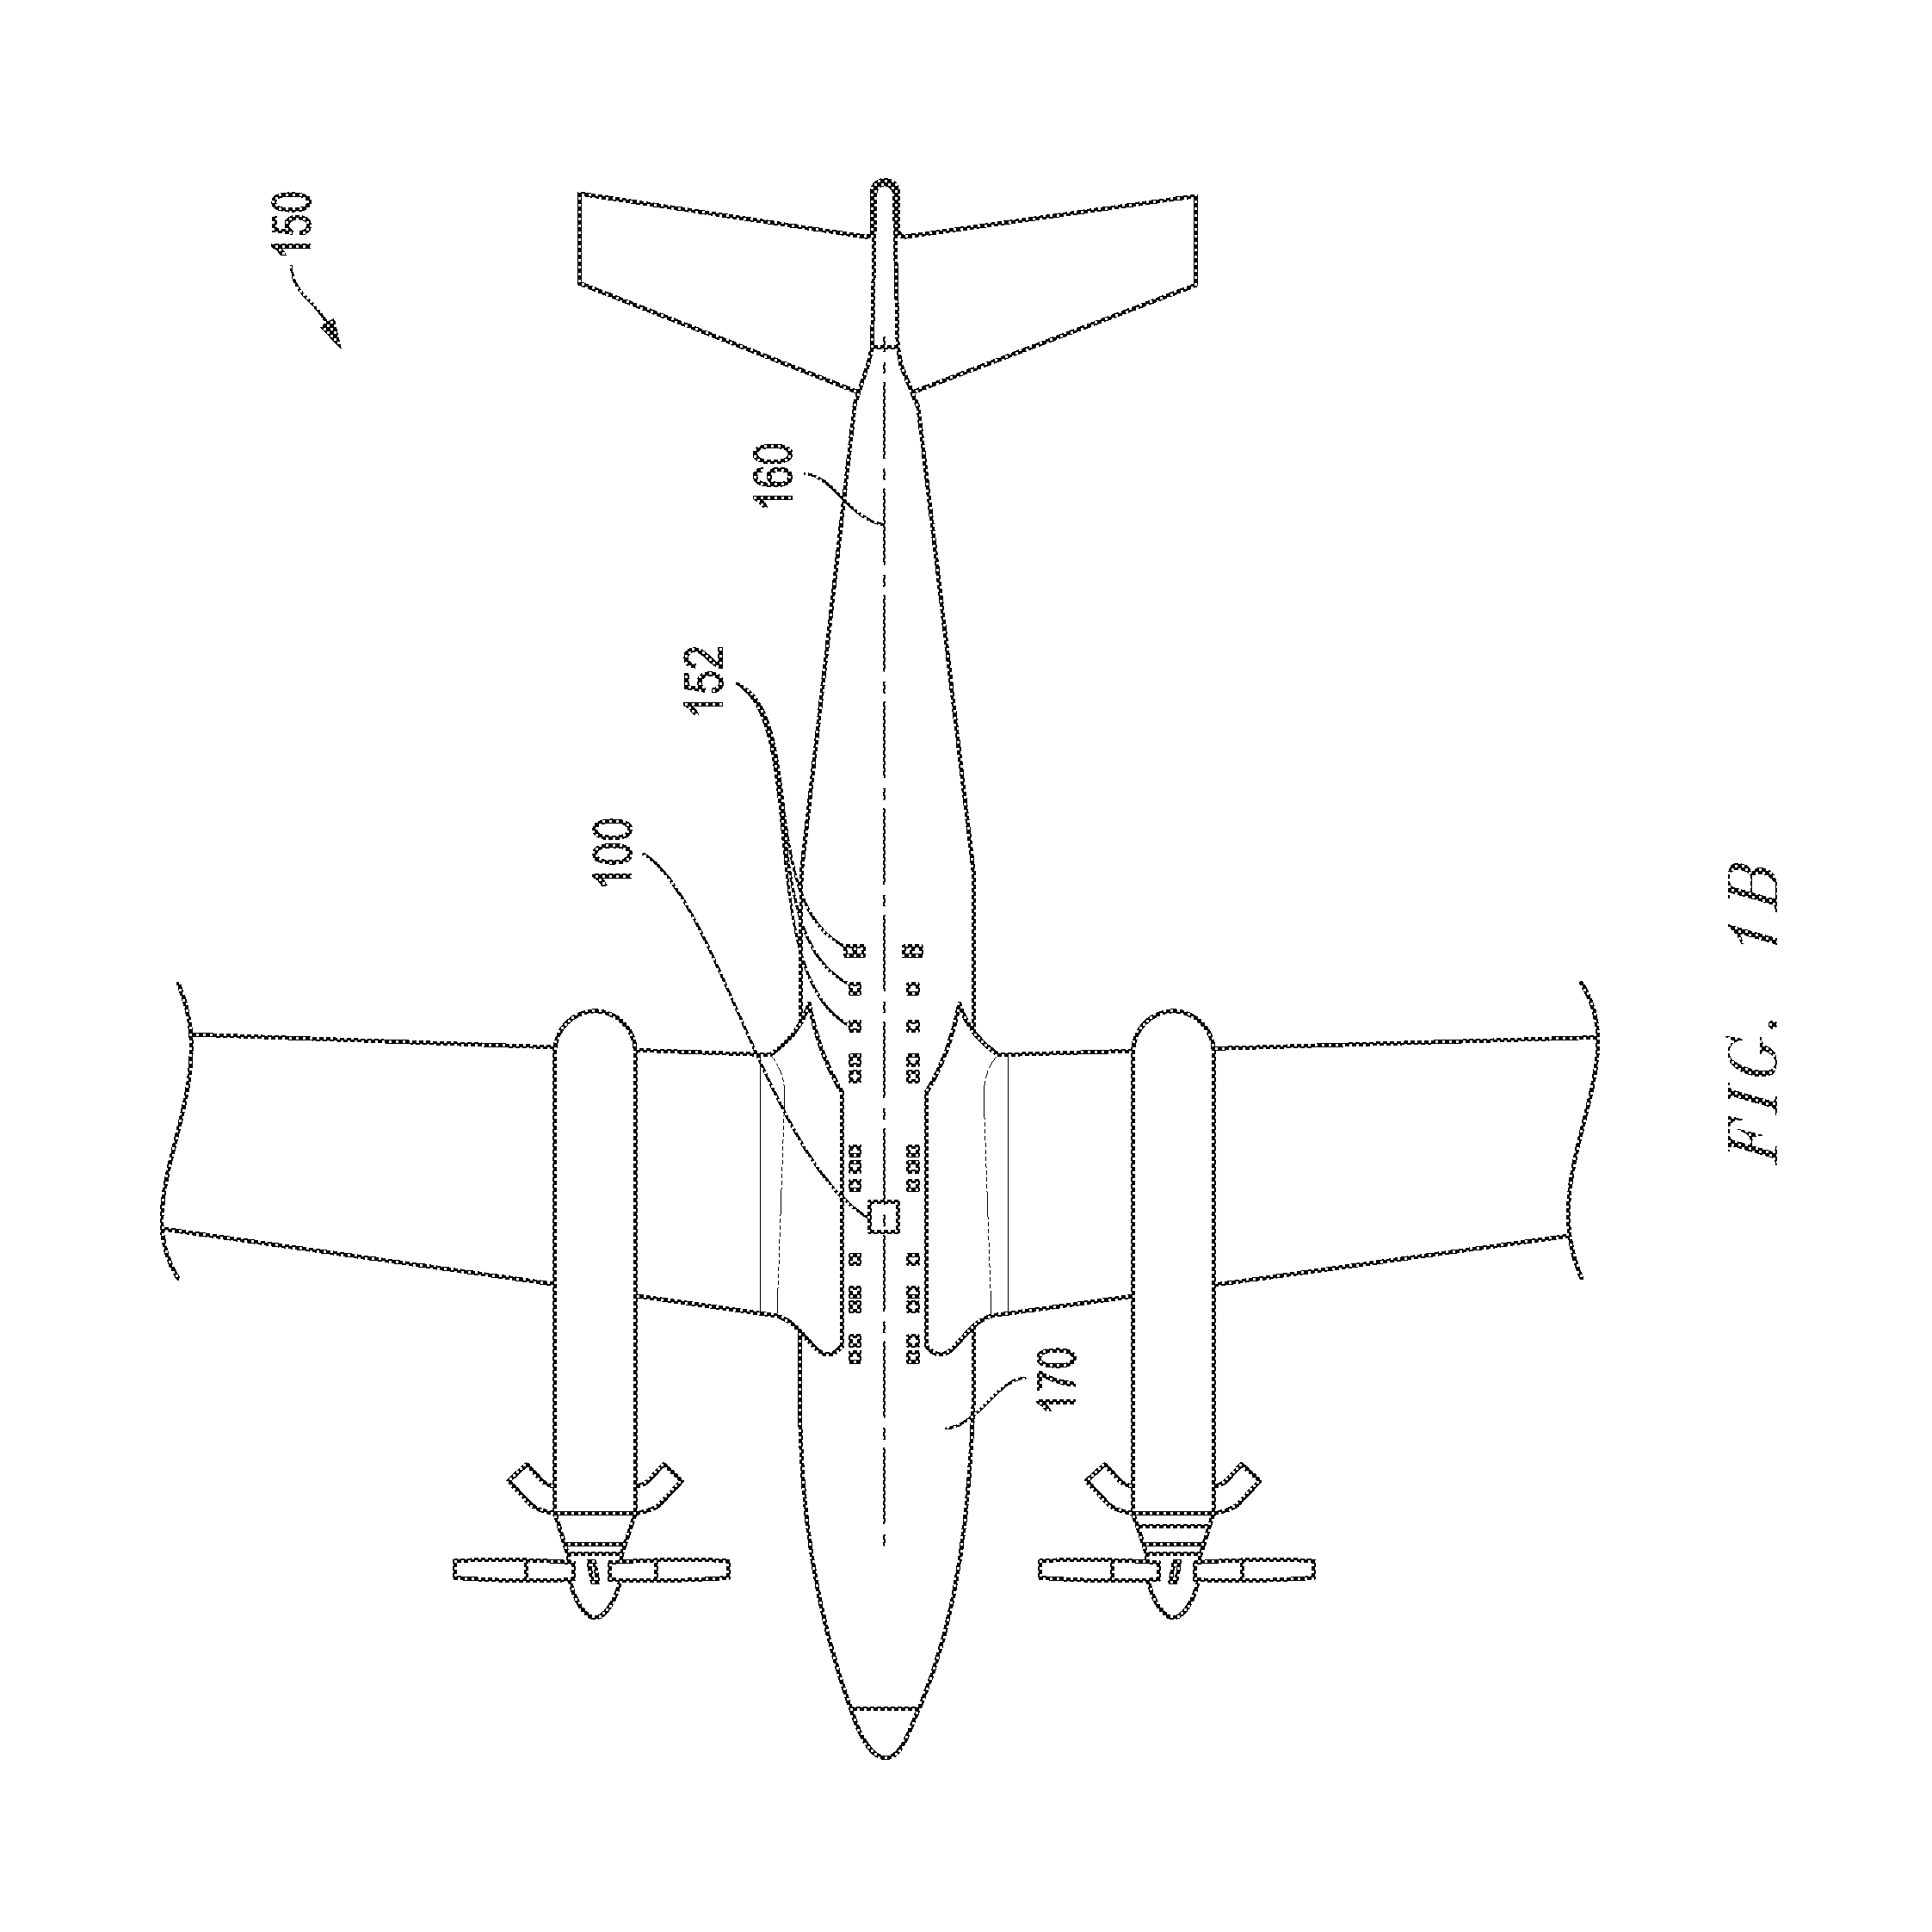 Reconfigurable Payload Systems (RPS) With Operational Load Envelopes For Aircraft And Methods Related Thereto